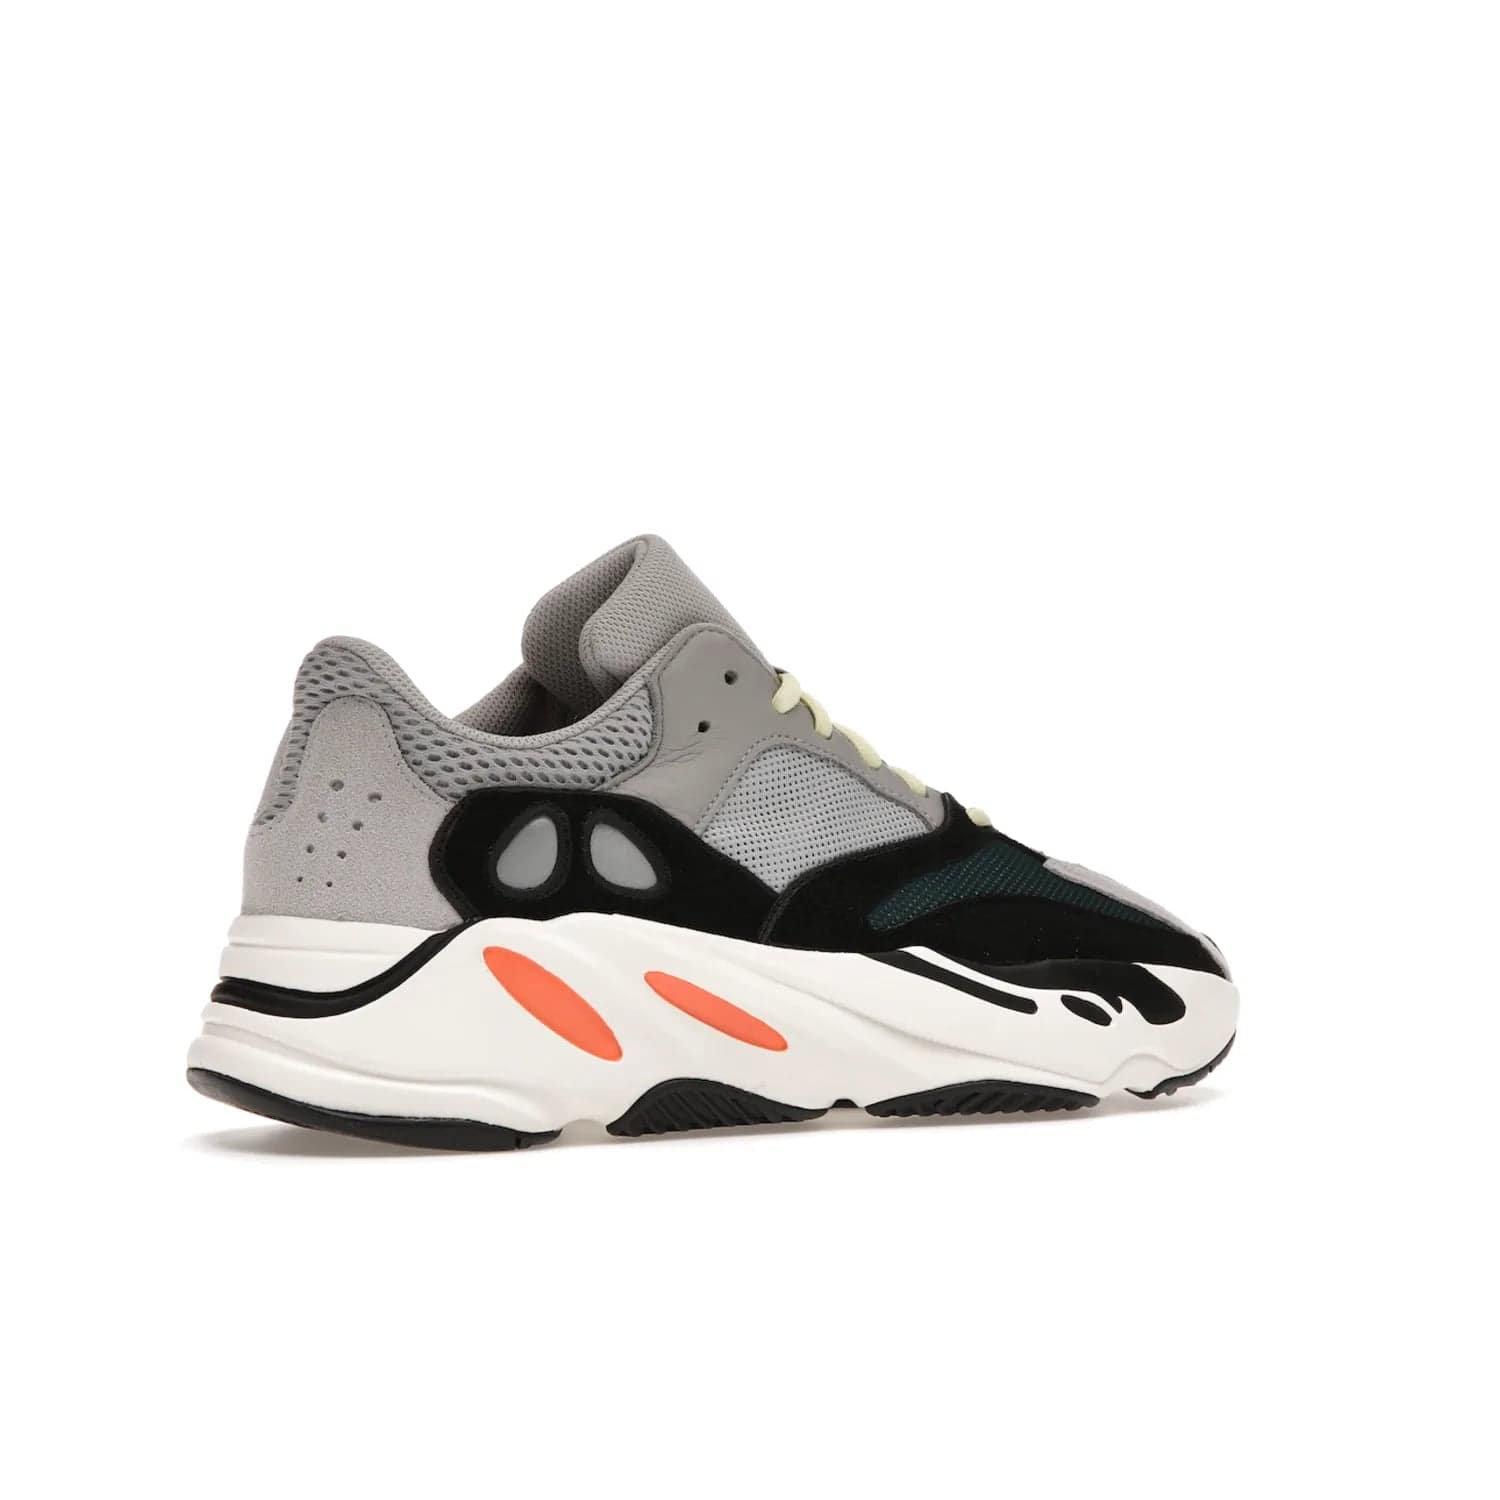 adidas Yeezy Boost 700 Wave Runner - Image 34 - Only at www.BallersClubKickz.com - Shop the iconic adidas Yeezy Boost 700 Wave Runner. Featuring grey mesh and leather upper, black suede overlays, teal mesh underlays, and signature Boost sole. Be bold & make a statement.